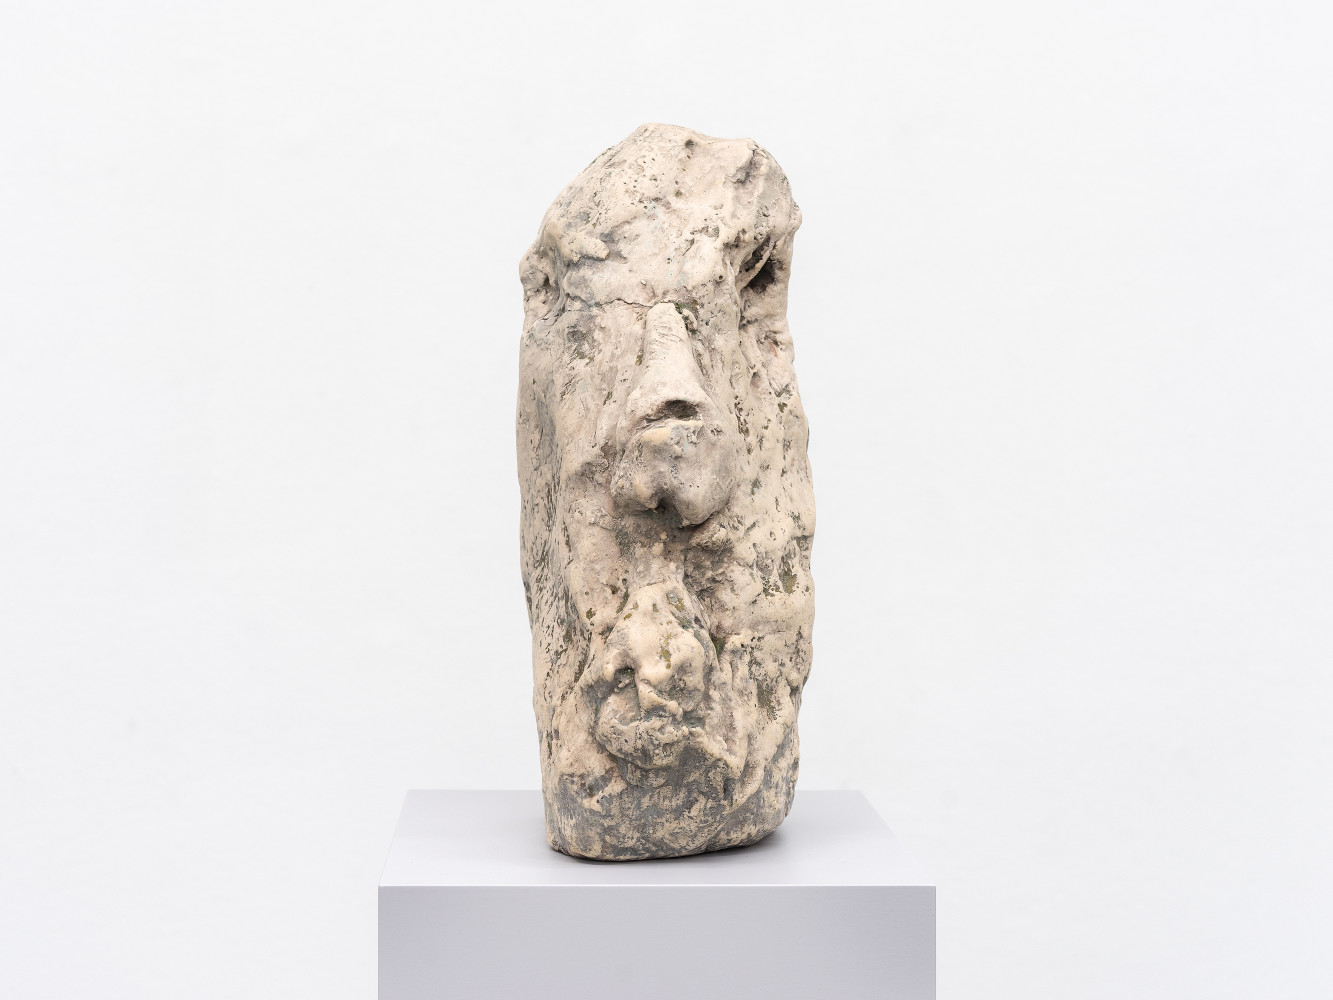 A sculpture by William Tucker depicting a face 